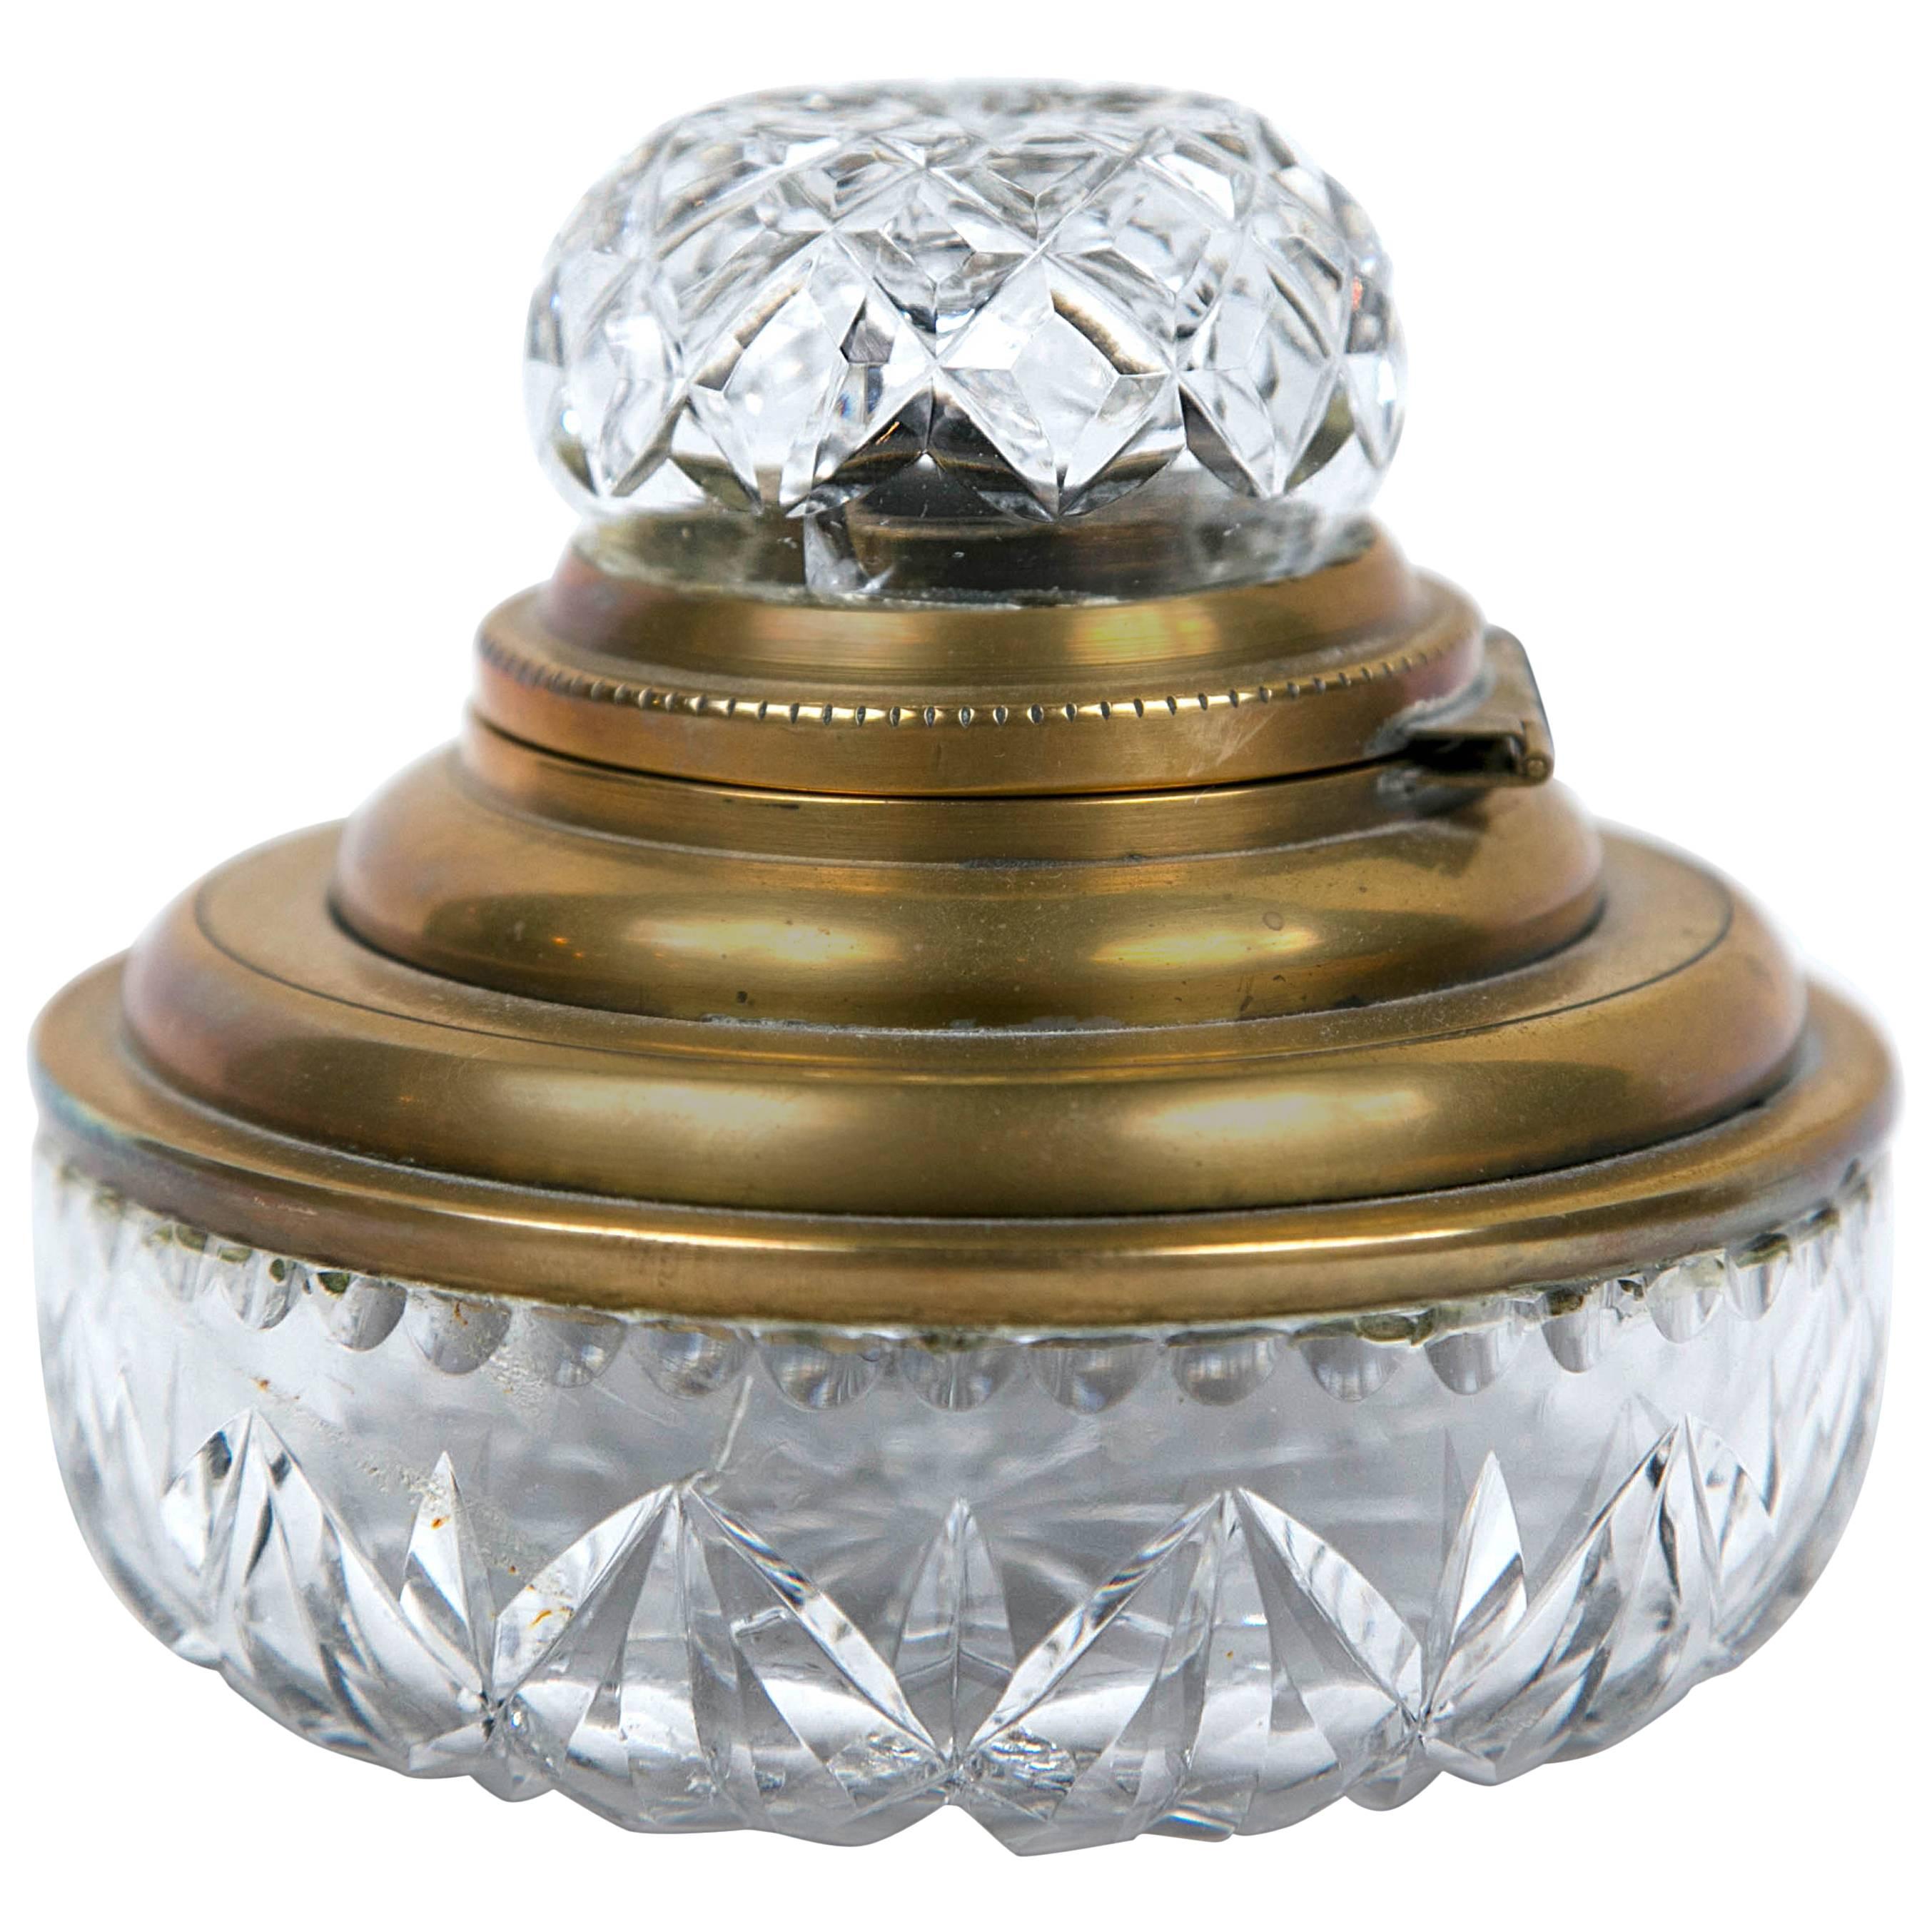 Antique Crystal and Bronze Inkwell